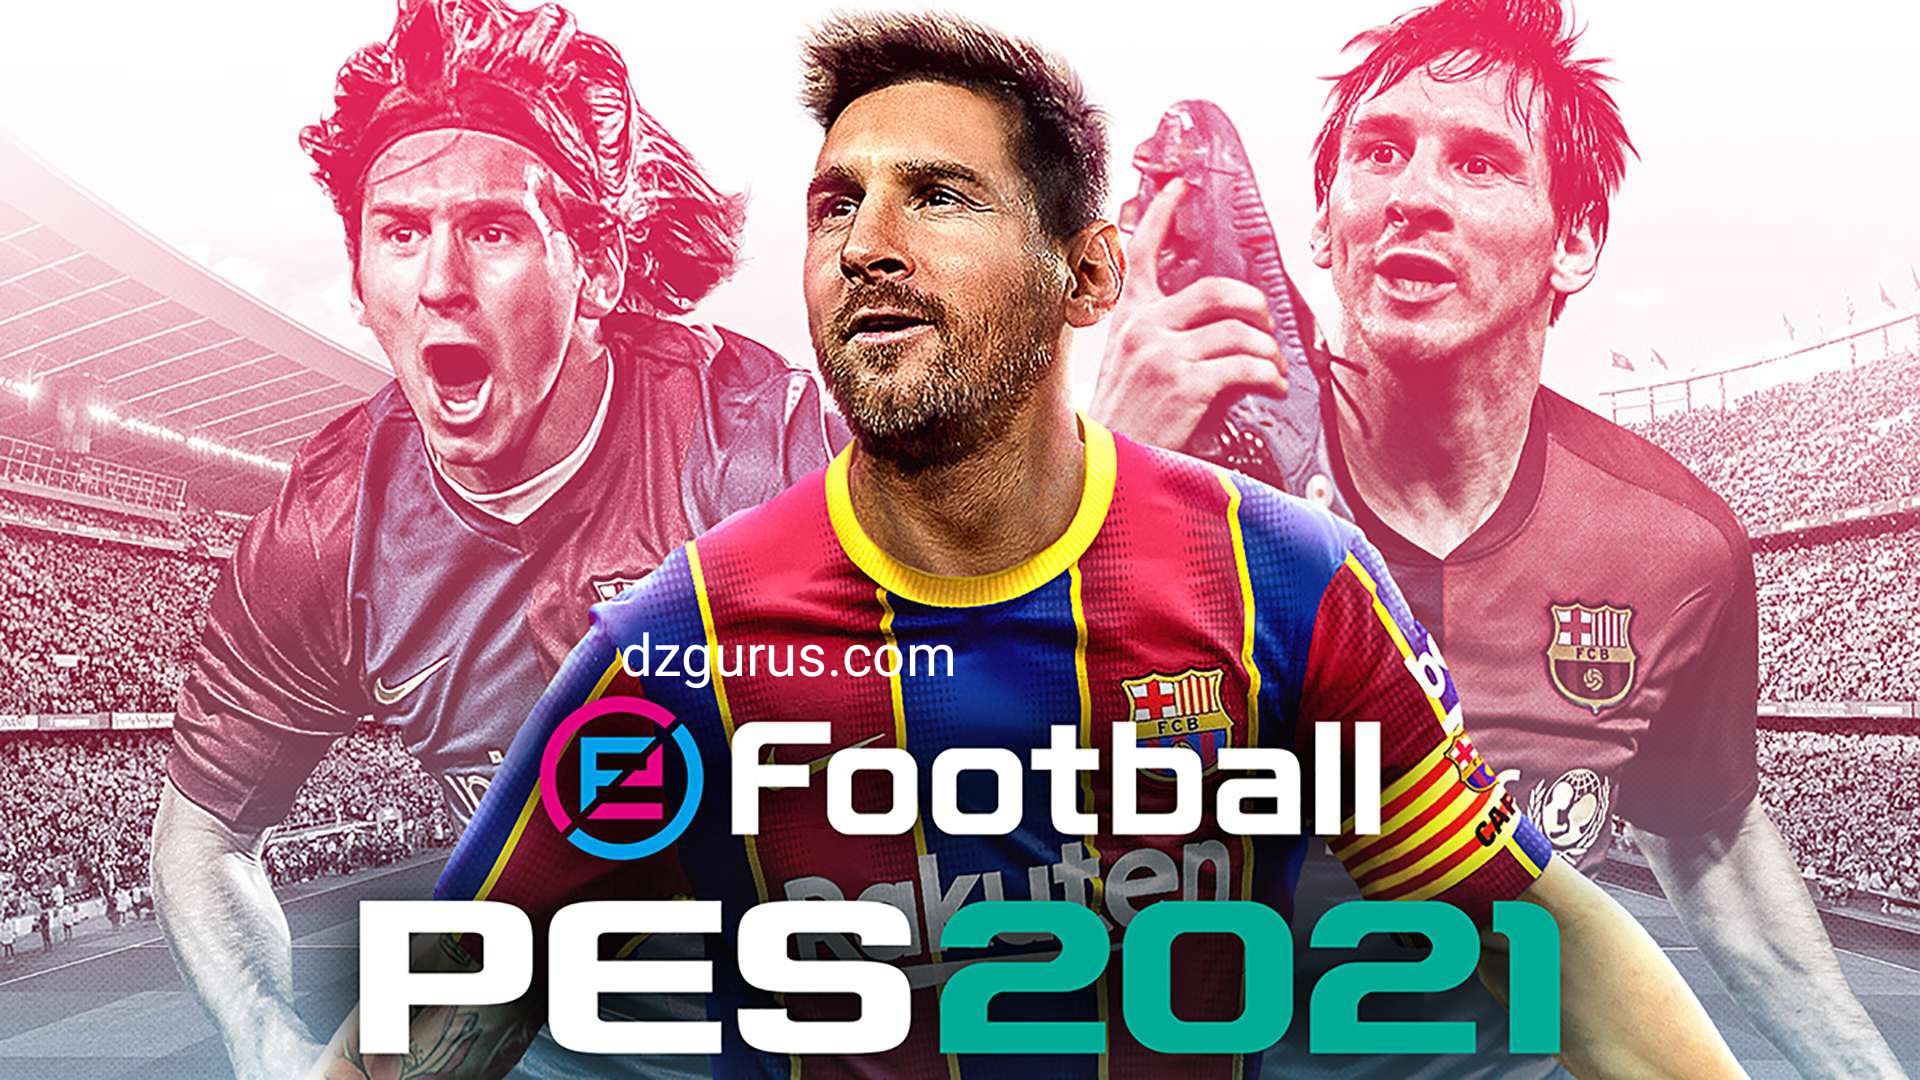 download efootball 2022 ps4 for free